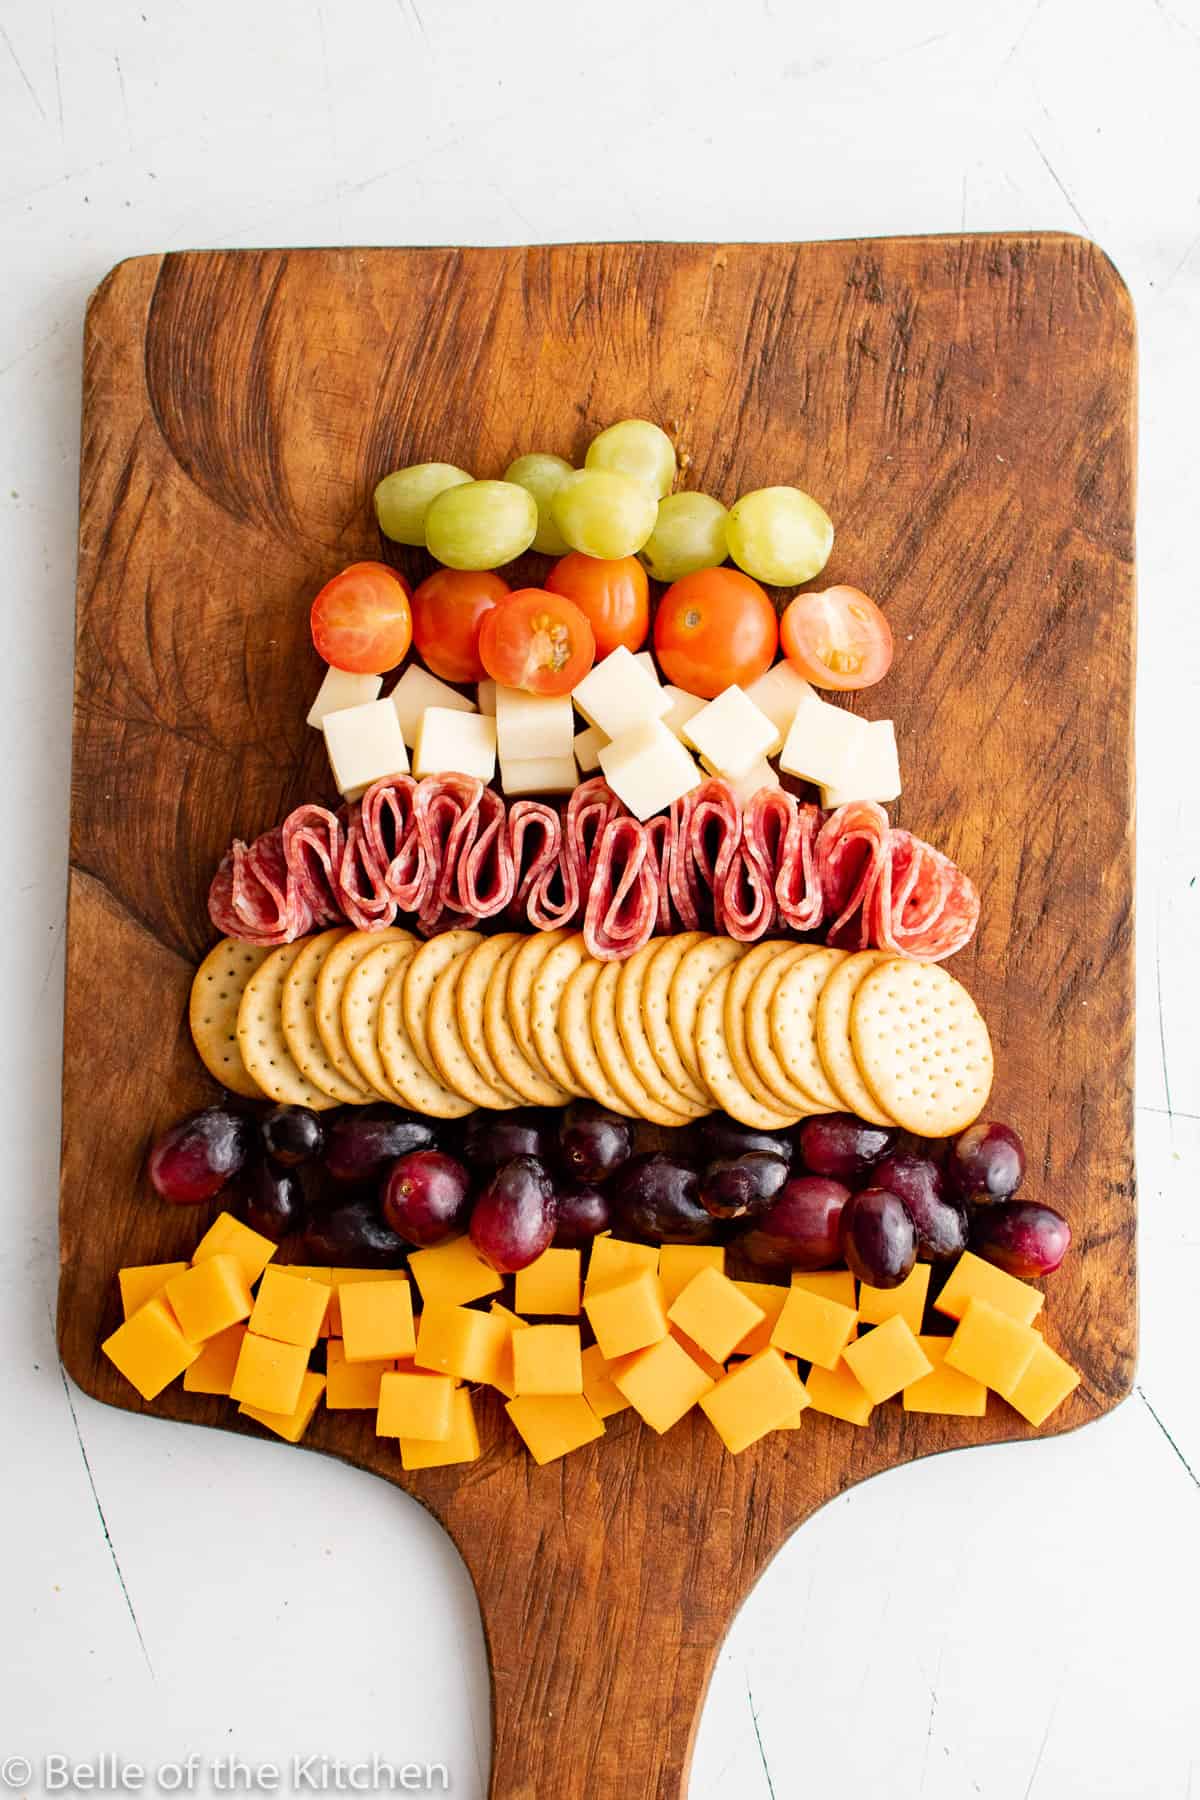 cut up cheese cubes, grapes, crackers, tomatoes, and salami on a wooden cutting board.